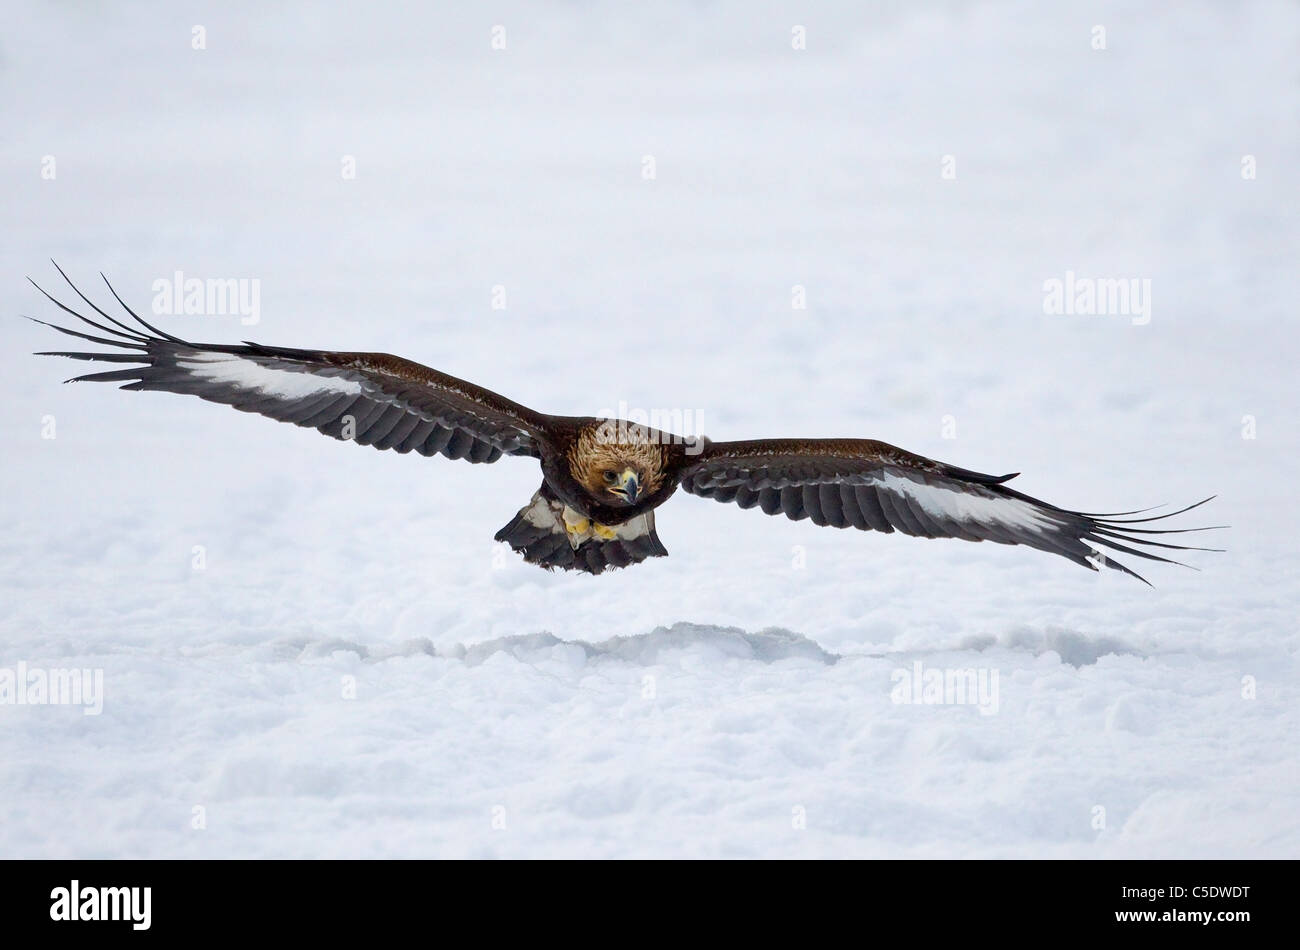 Close-up of a golden eagle with spread wings in flight over snowed landscape Stock Photo